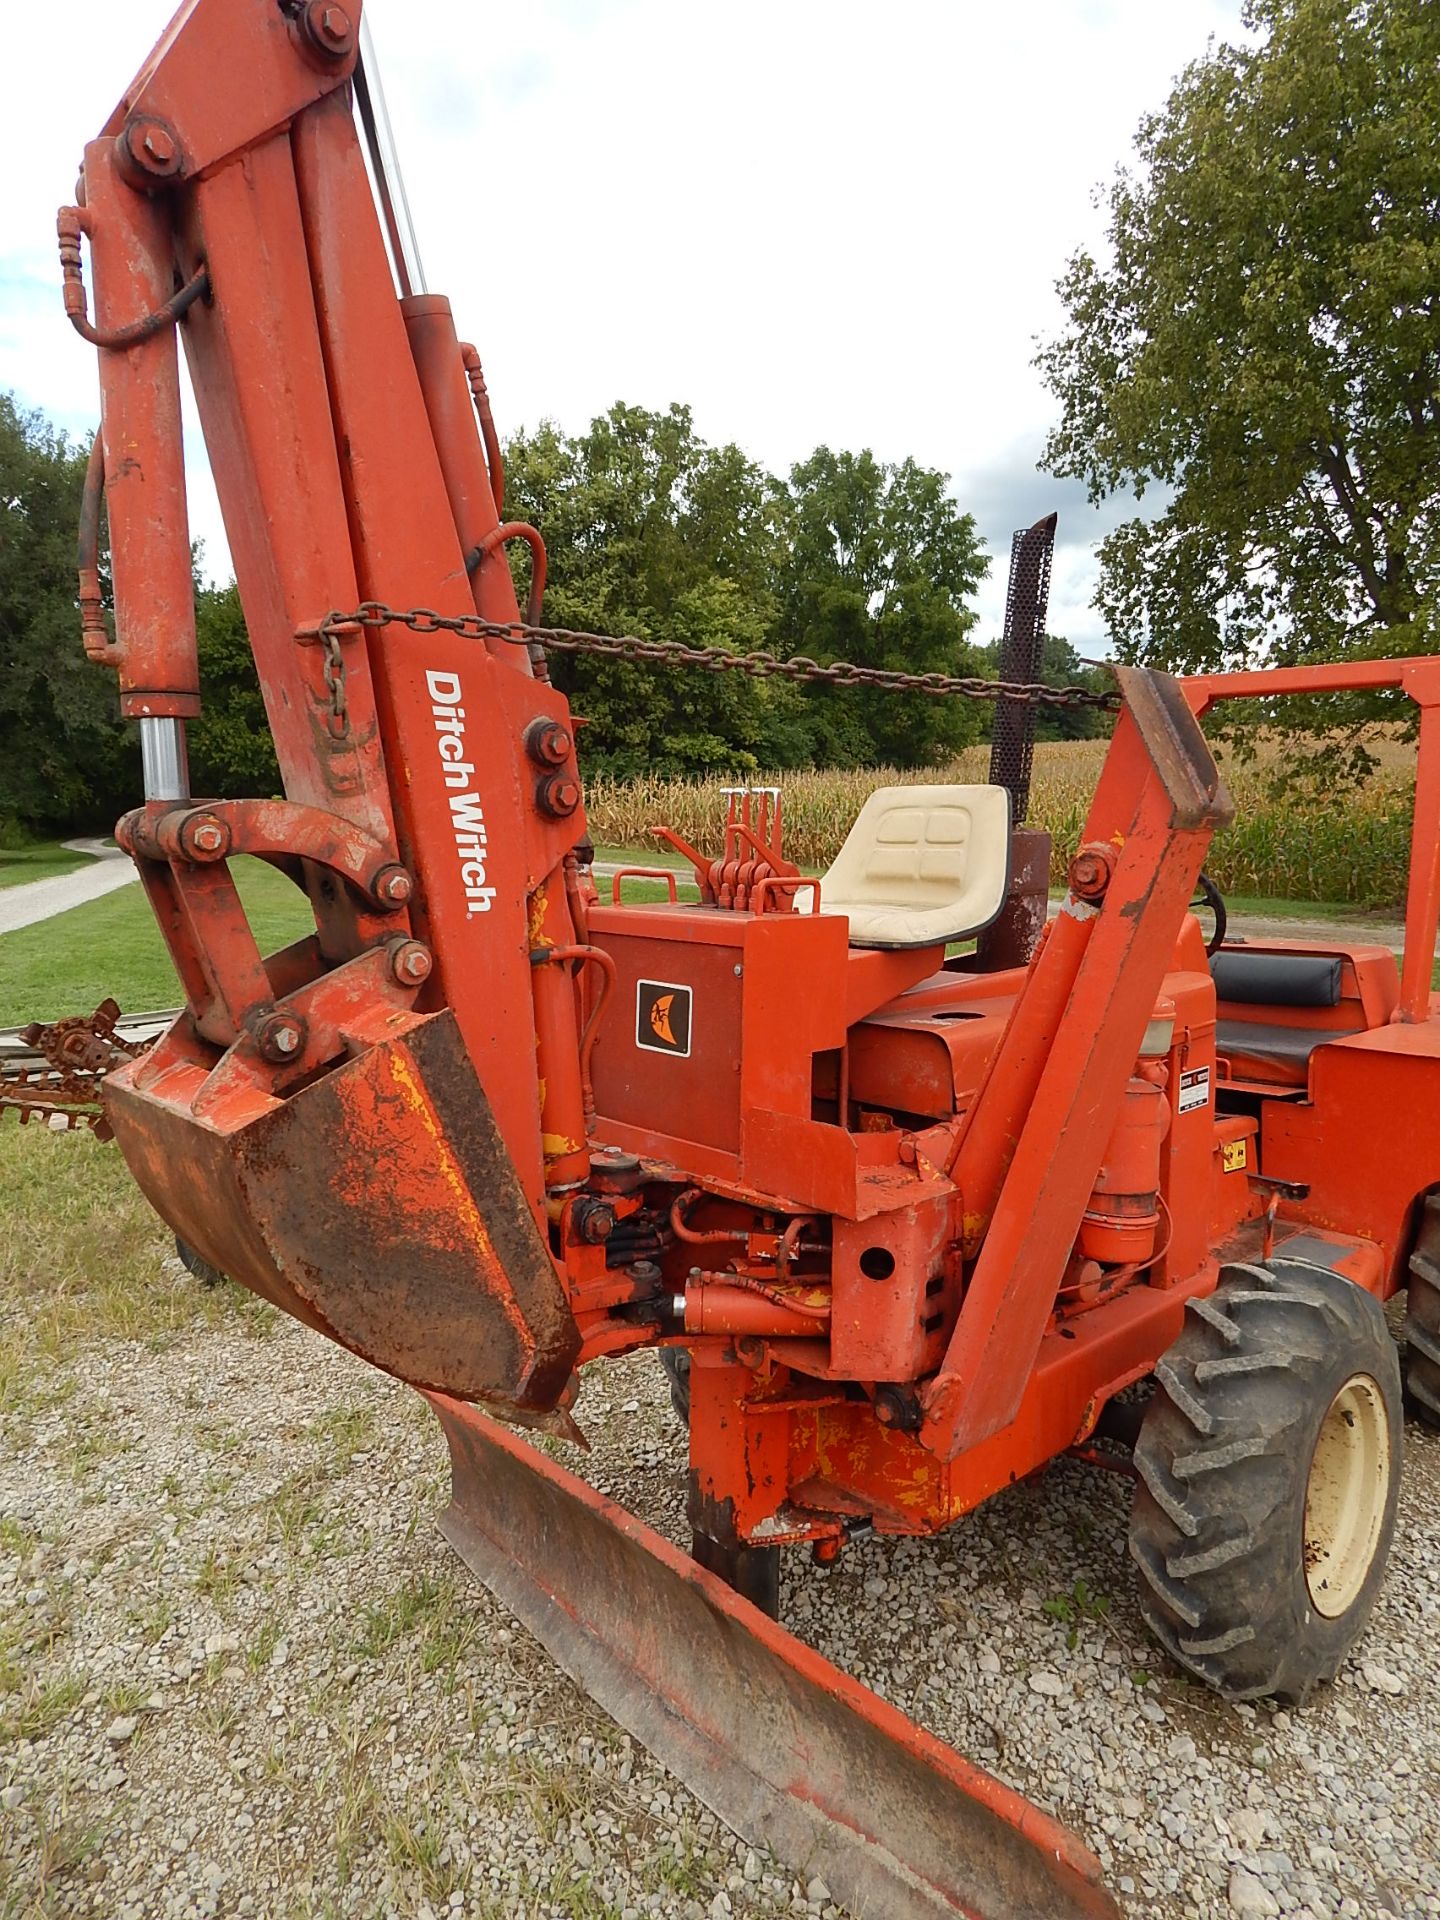 Ditch Witch R65 4 x 4 Trencher w/ 7 ft Depth, 308 Hours, Backhoe Attachment w/ 18 in Bucket, 6 ft - Image 7 of 13